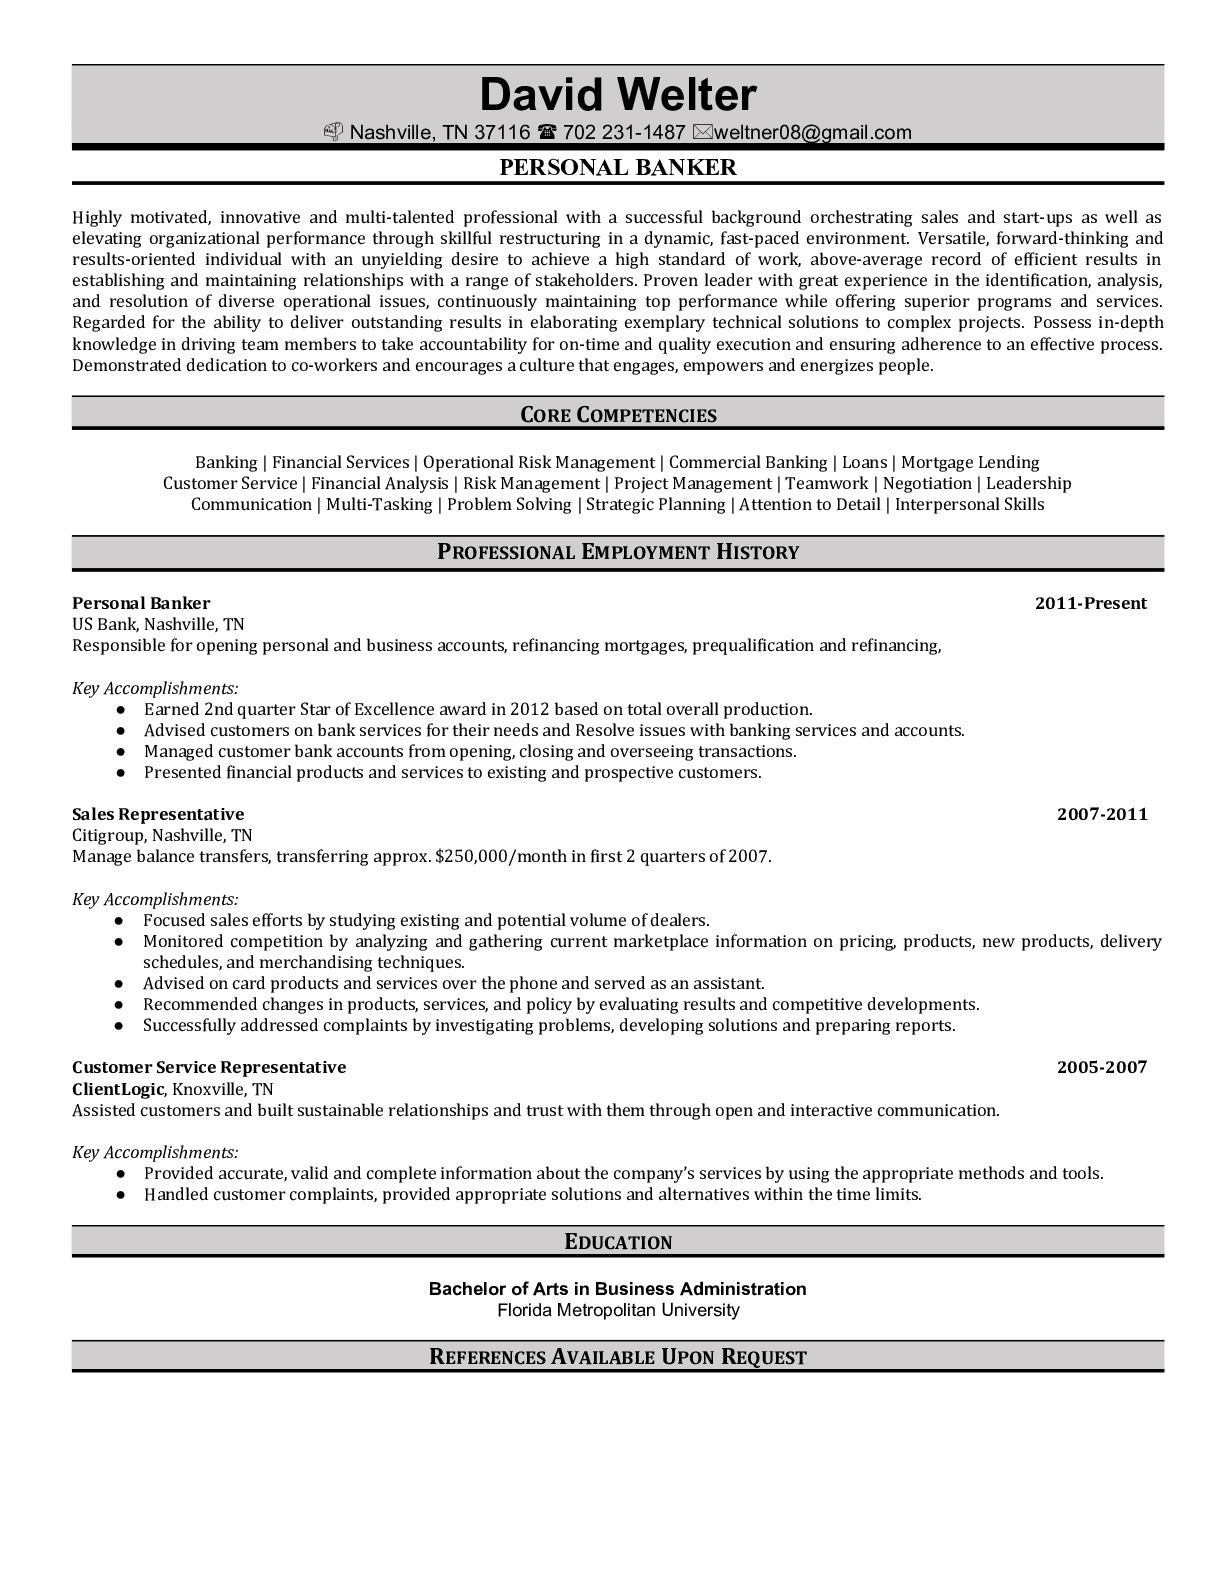 Resume Example for Banker